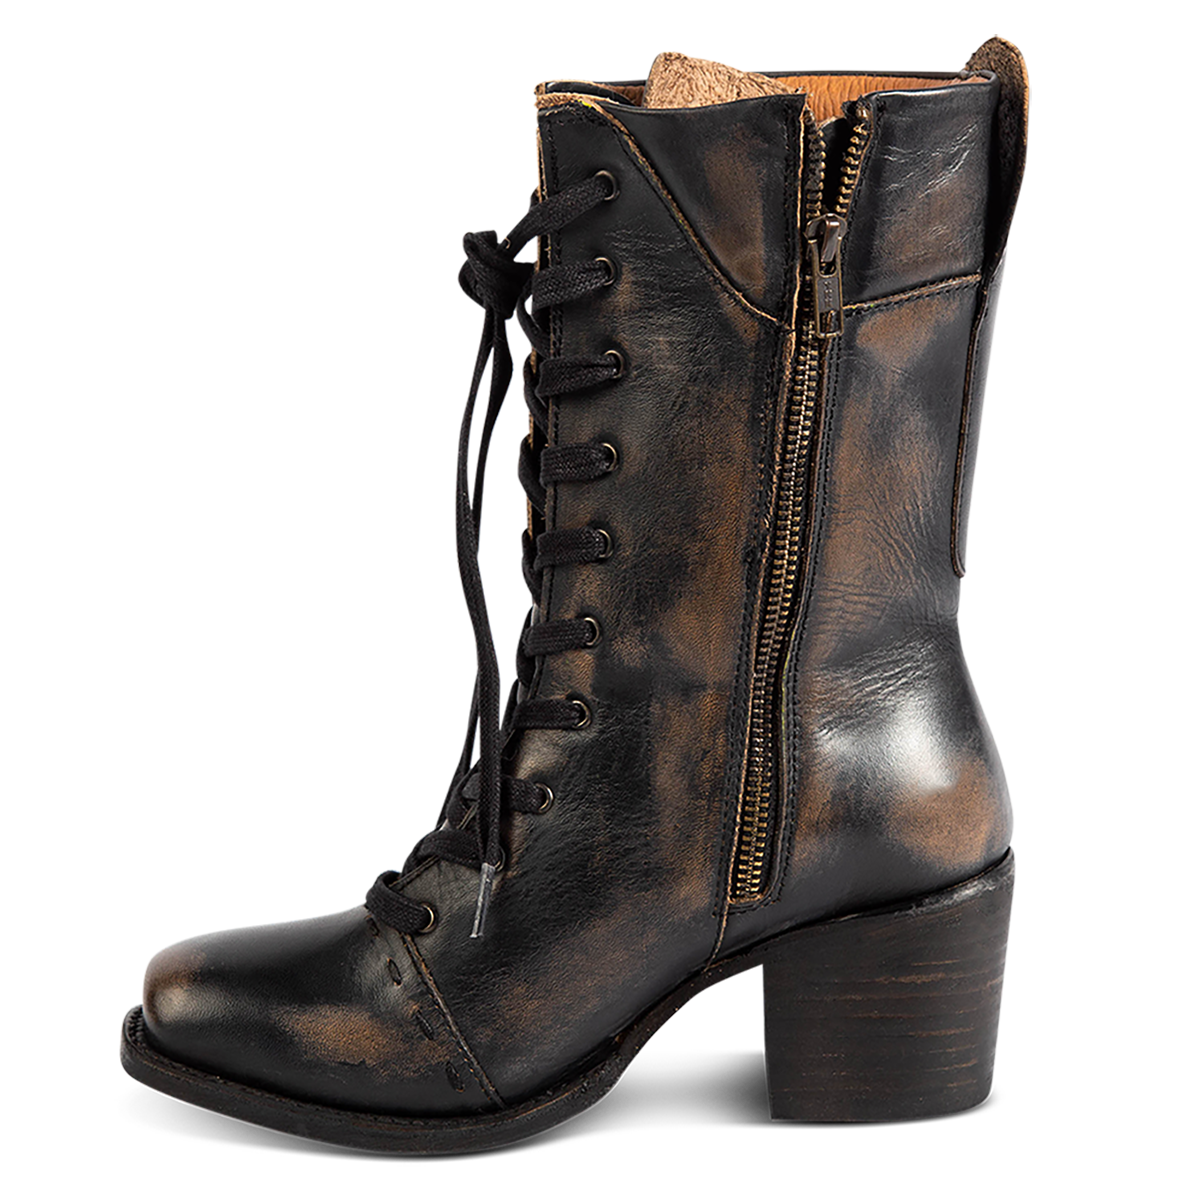 Inside view showing working brass zip closure, front tie lacing and stacked heel on FREEBIRD women's Dart black leather boot